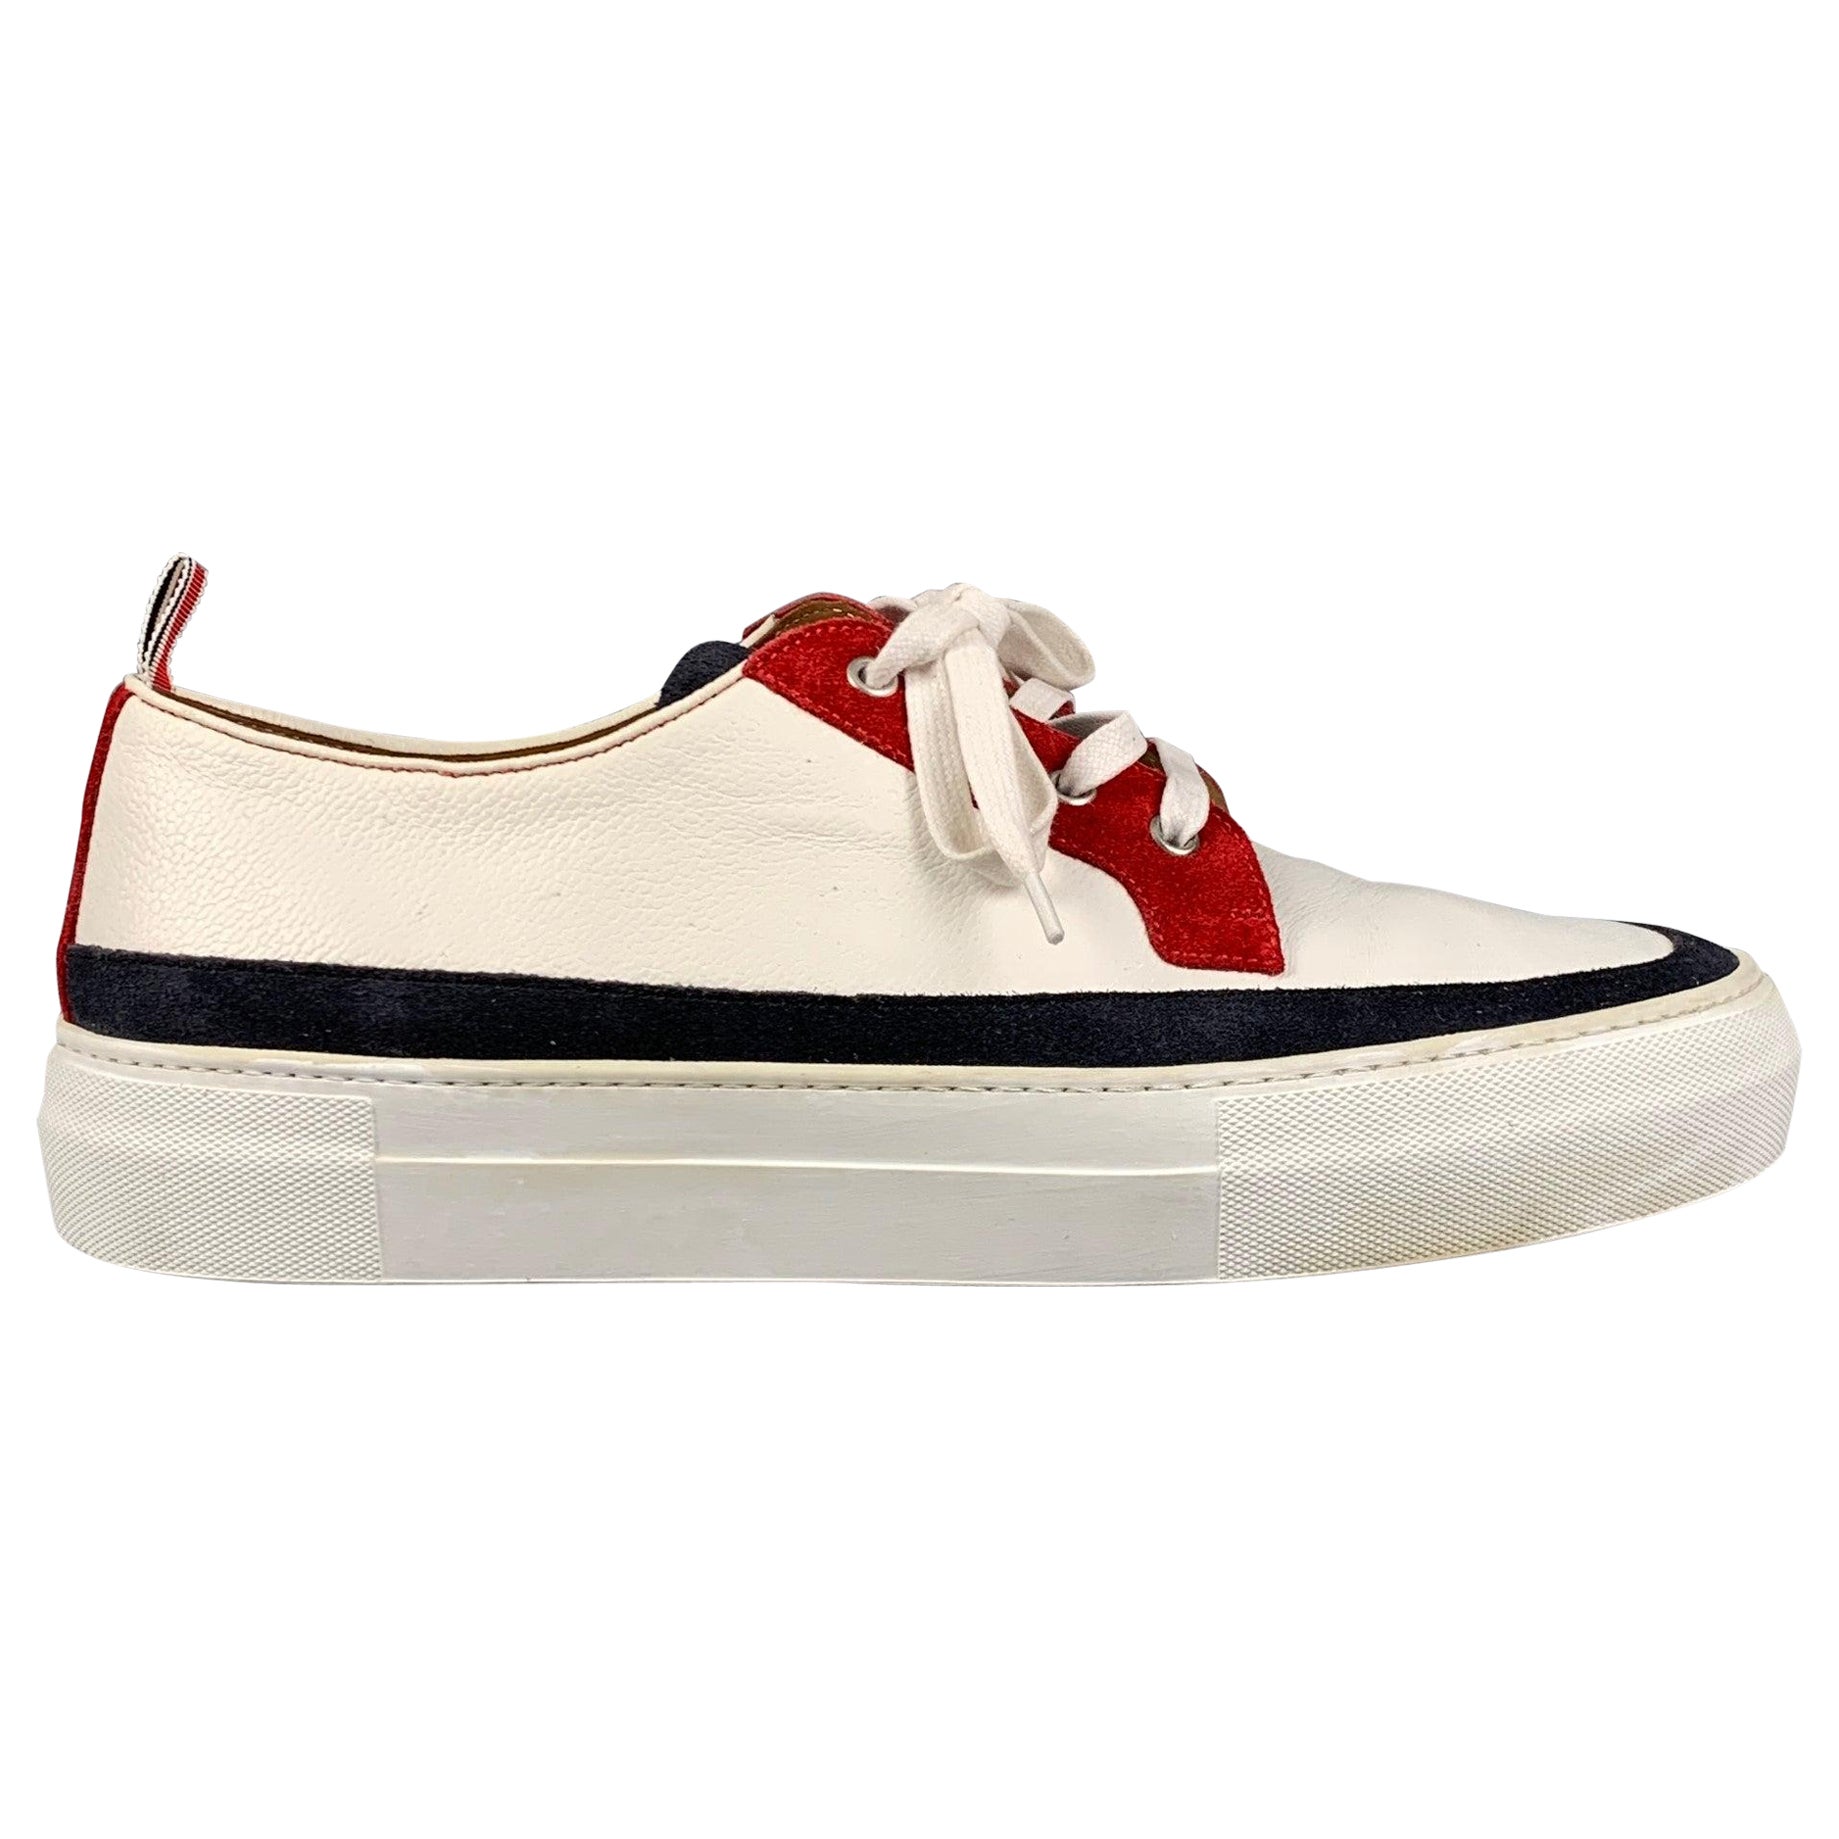 THOM BROWNE Size 10 White Red & Blue Color Block Leather Platform Sneakers For Sale